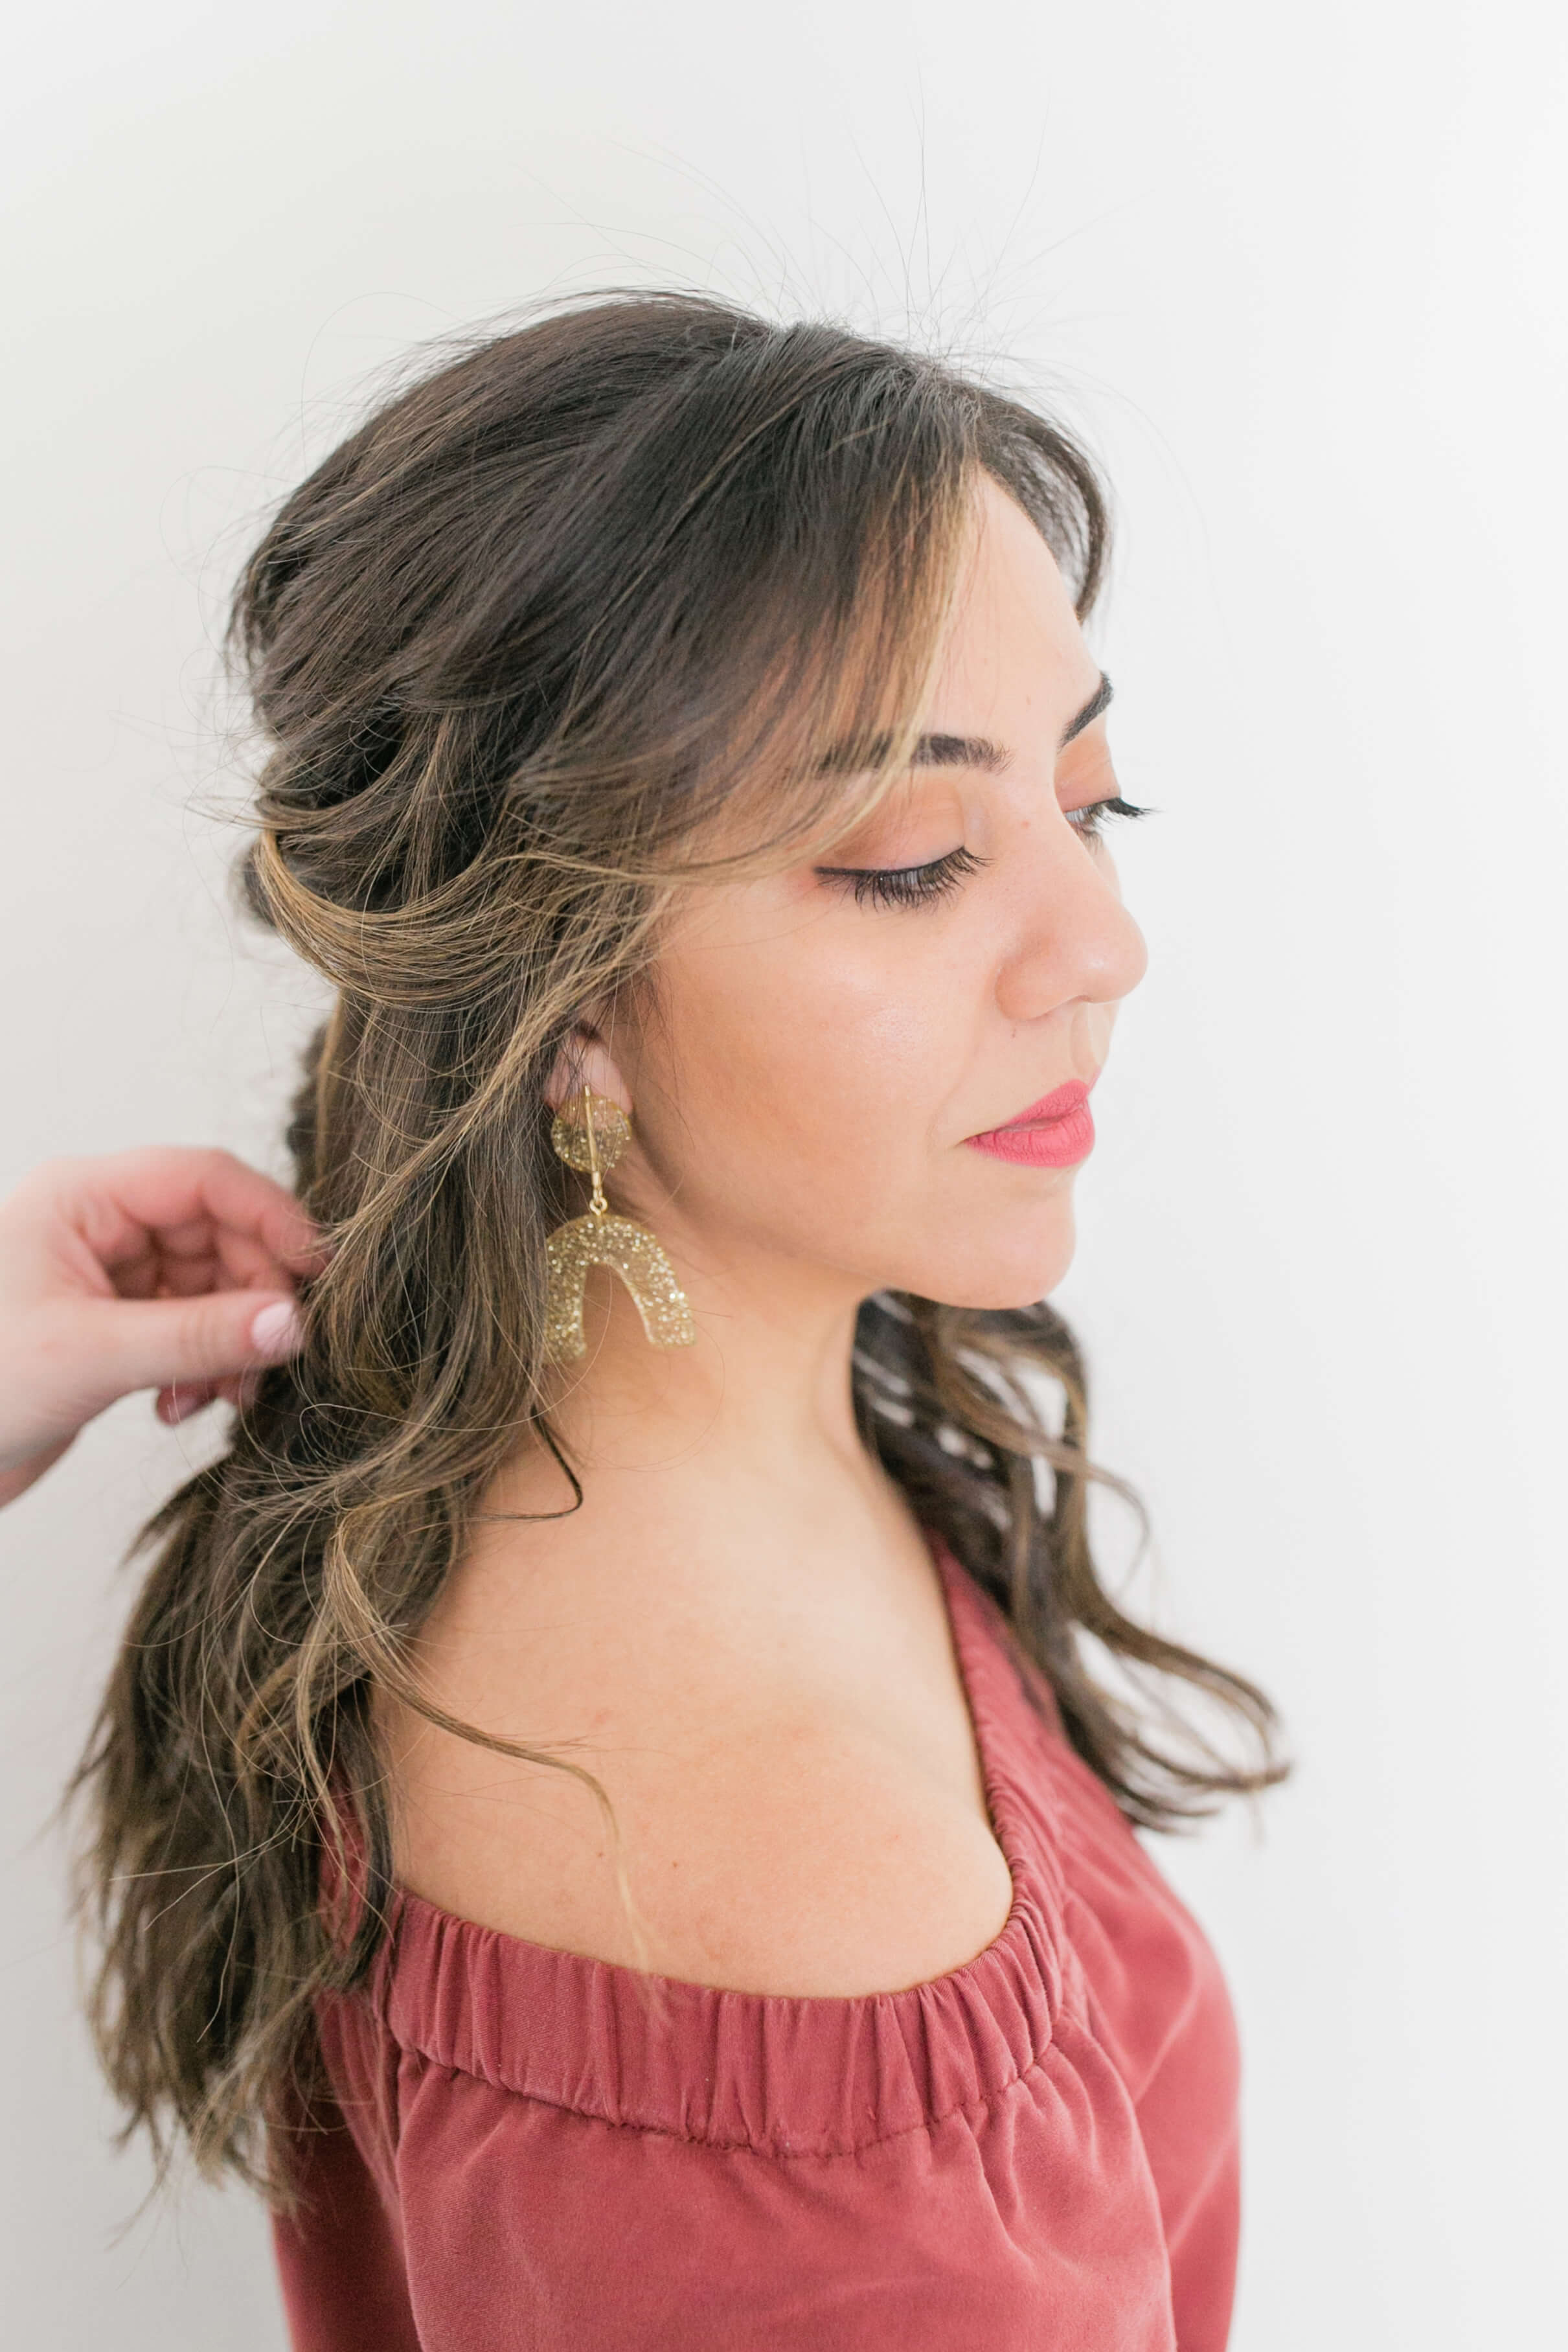 To celebrate the new live action remake of Disney's Aladdin, I created this Modern Jasmine Hairstyle DIY! The perfect boho hairdo!